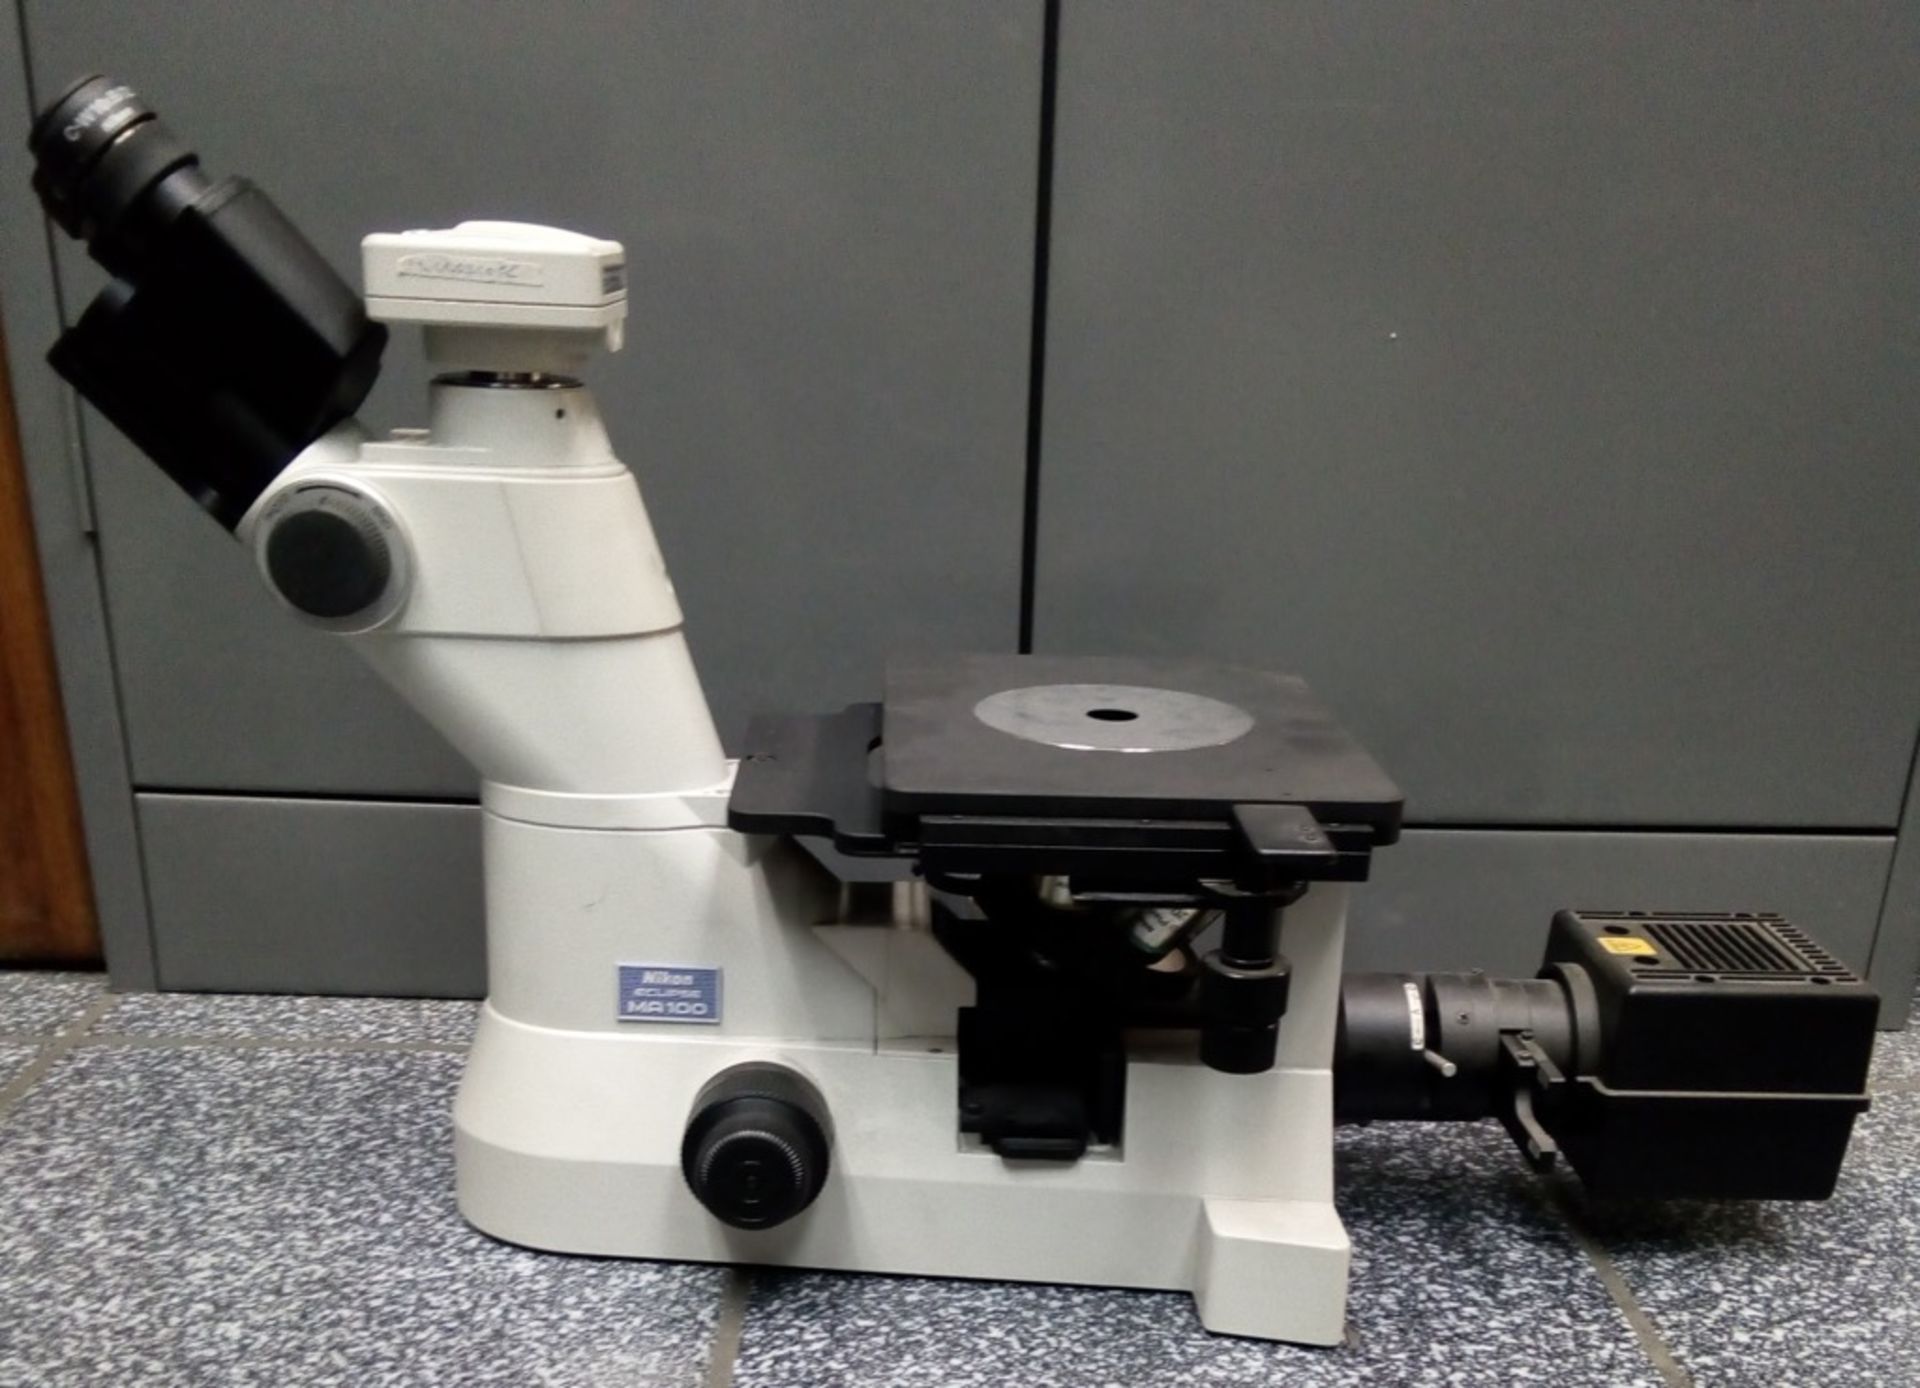 NIKON ECLIPSE MA100 MICROSCOPE, W/ CPU AND SOFTWARE - Image 2 of 3